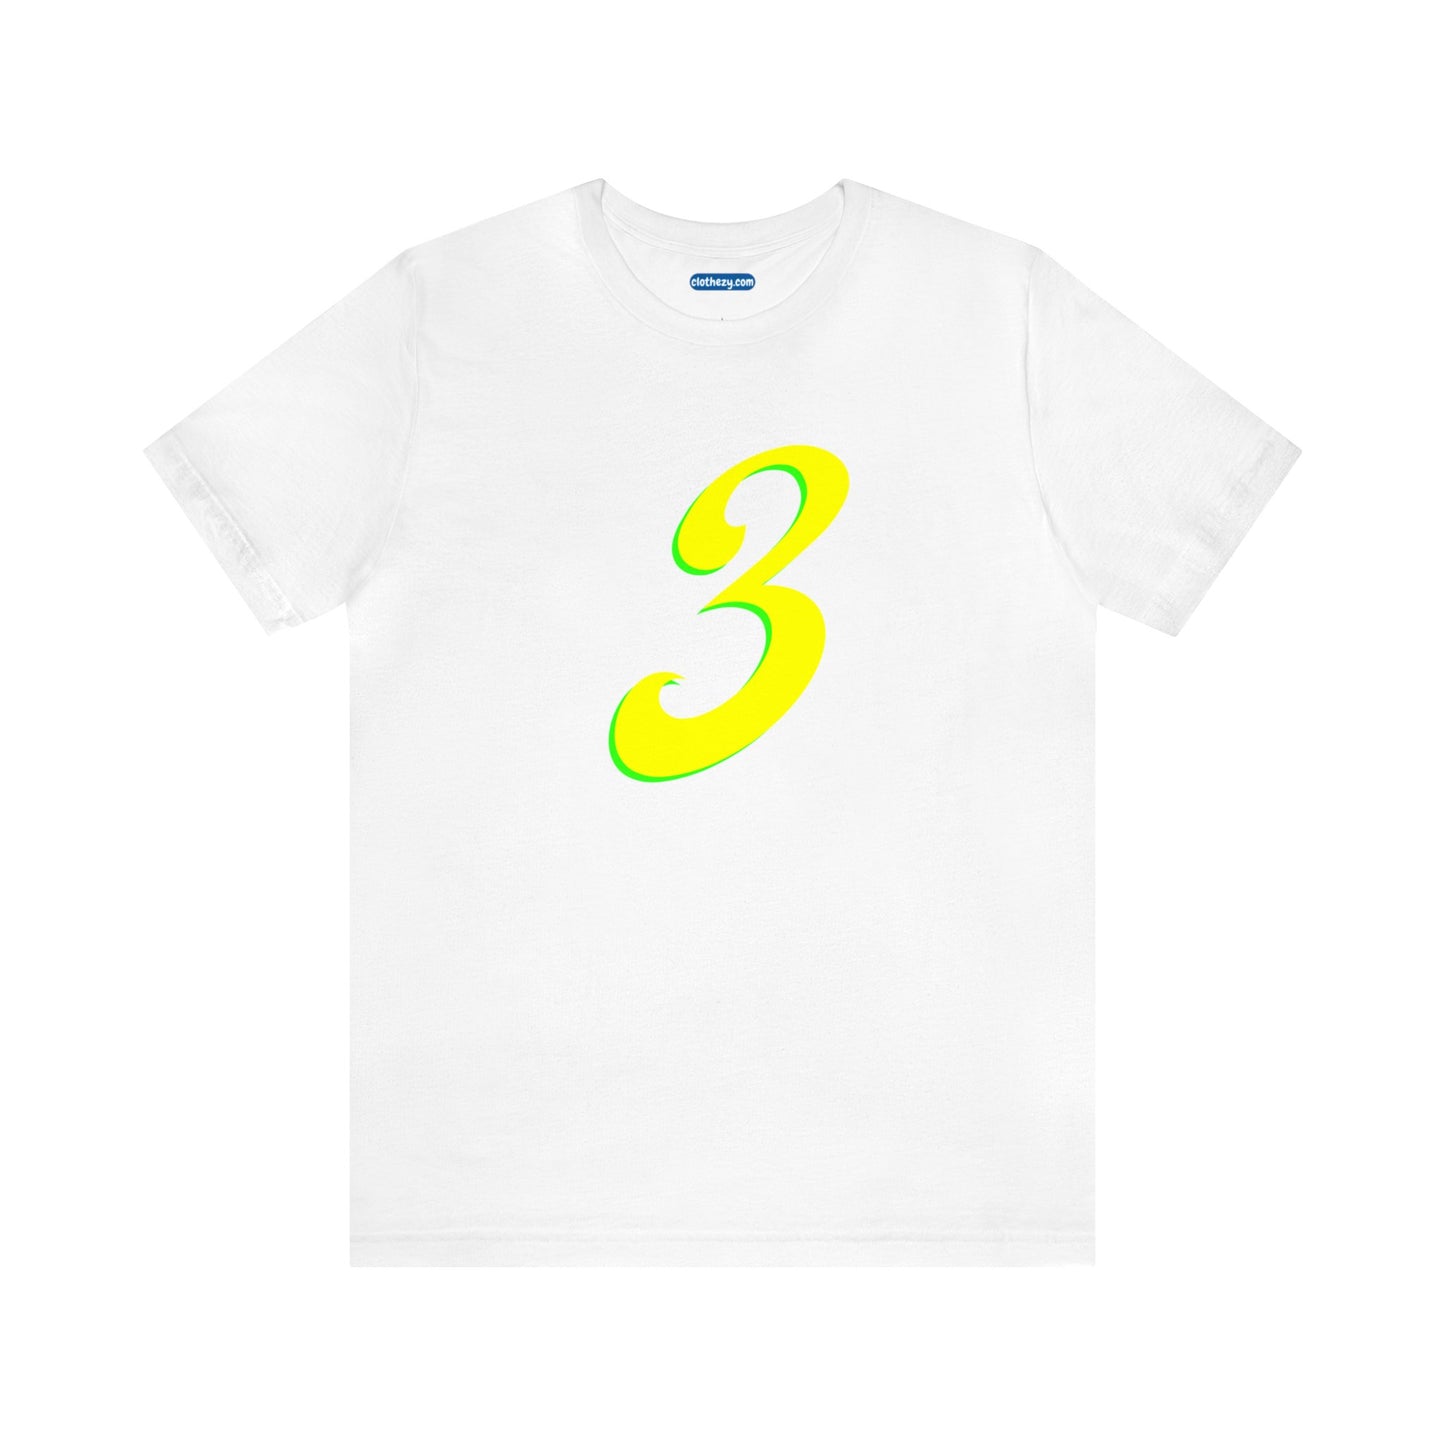 Number 3 Design - Soft Cotton Tee for birthdays and celebrations, Gift for friends and family, Multiple Options by clothezy.com in White Size Small - Buy Now